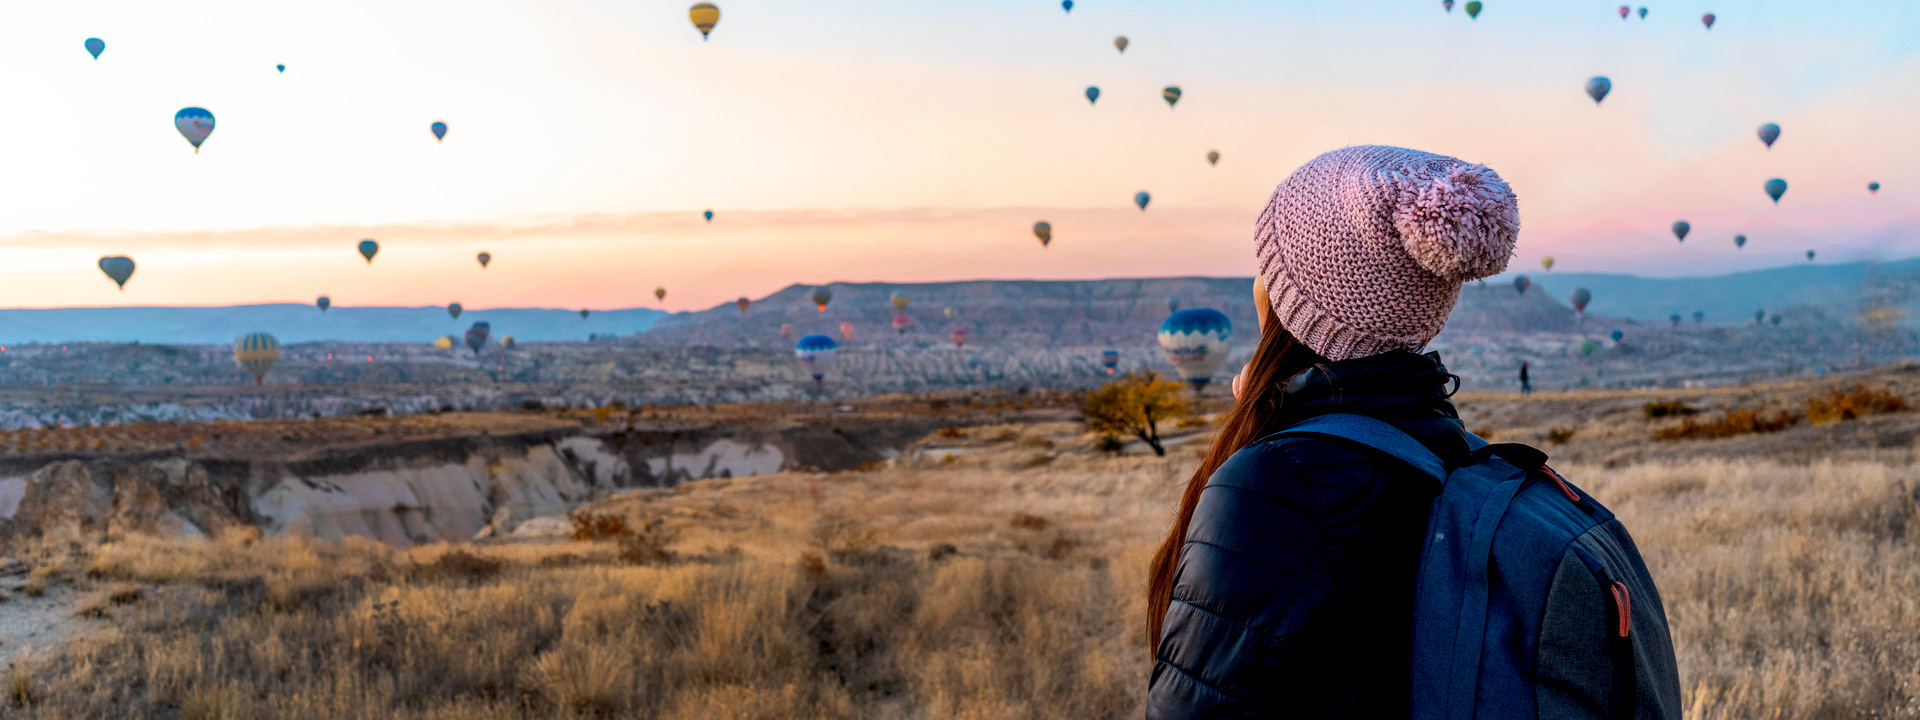 hiker looking at hot air ballons, Turkey, solo female traveler